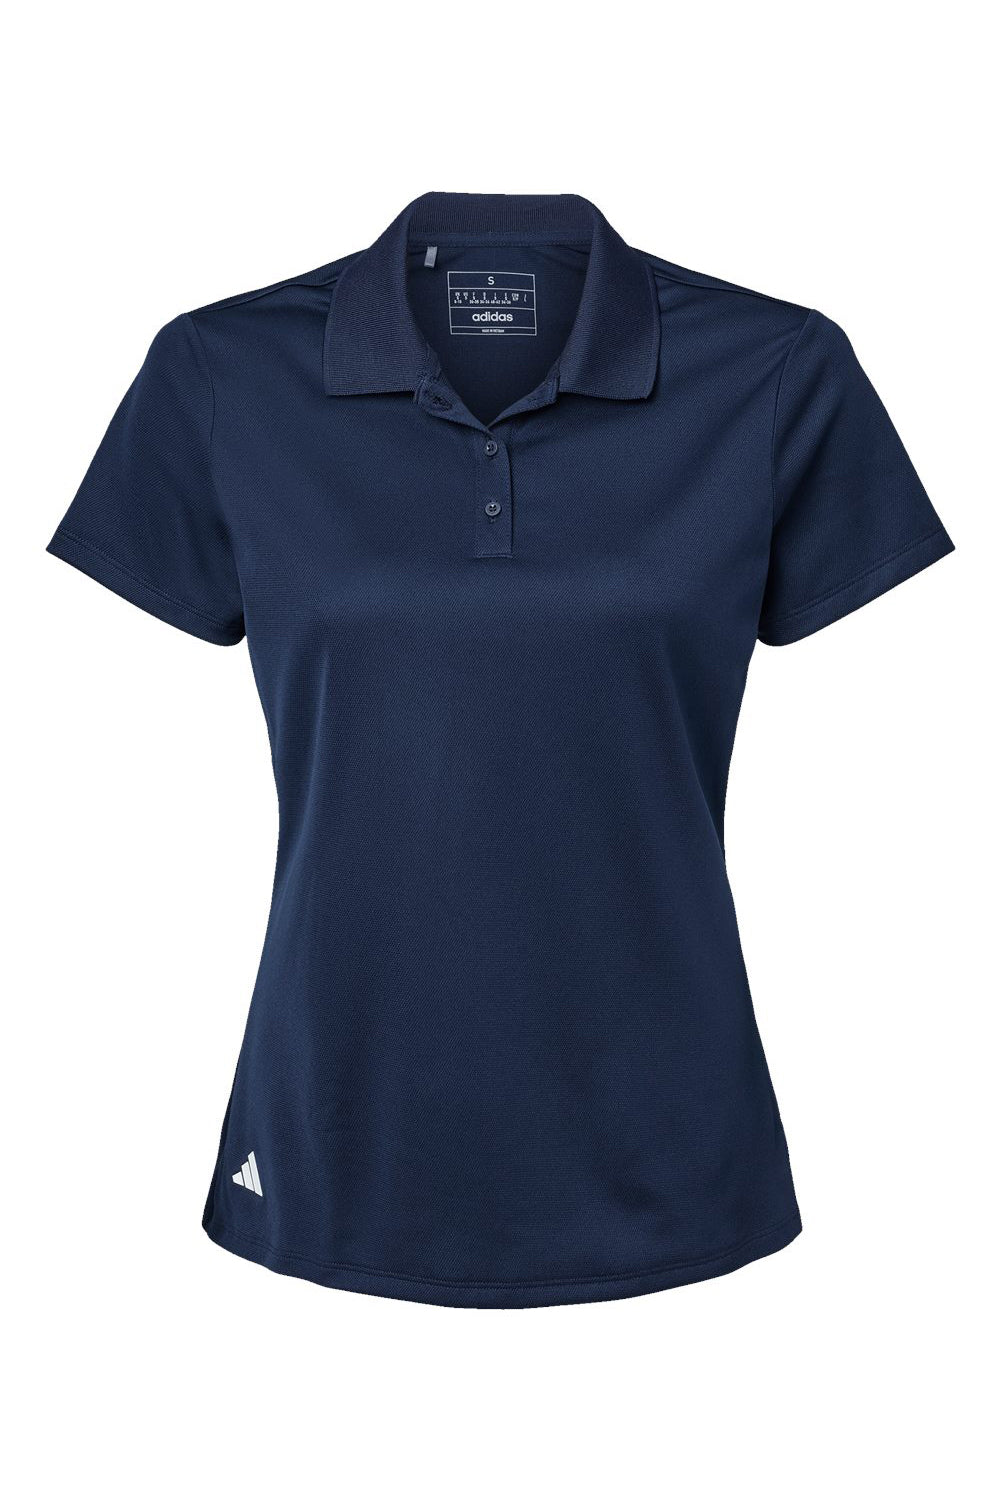 Adidas A431 Womens UV Protection Short Sleeve Polo Shirt Collegiate Navy Blue Flat Front